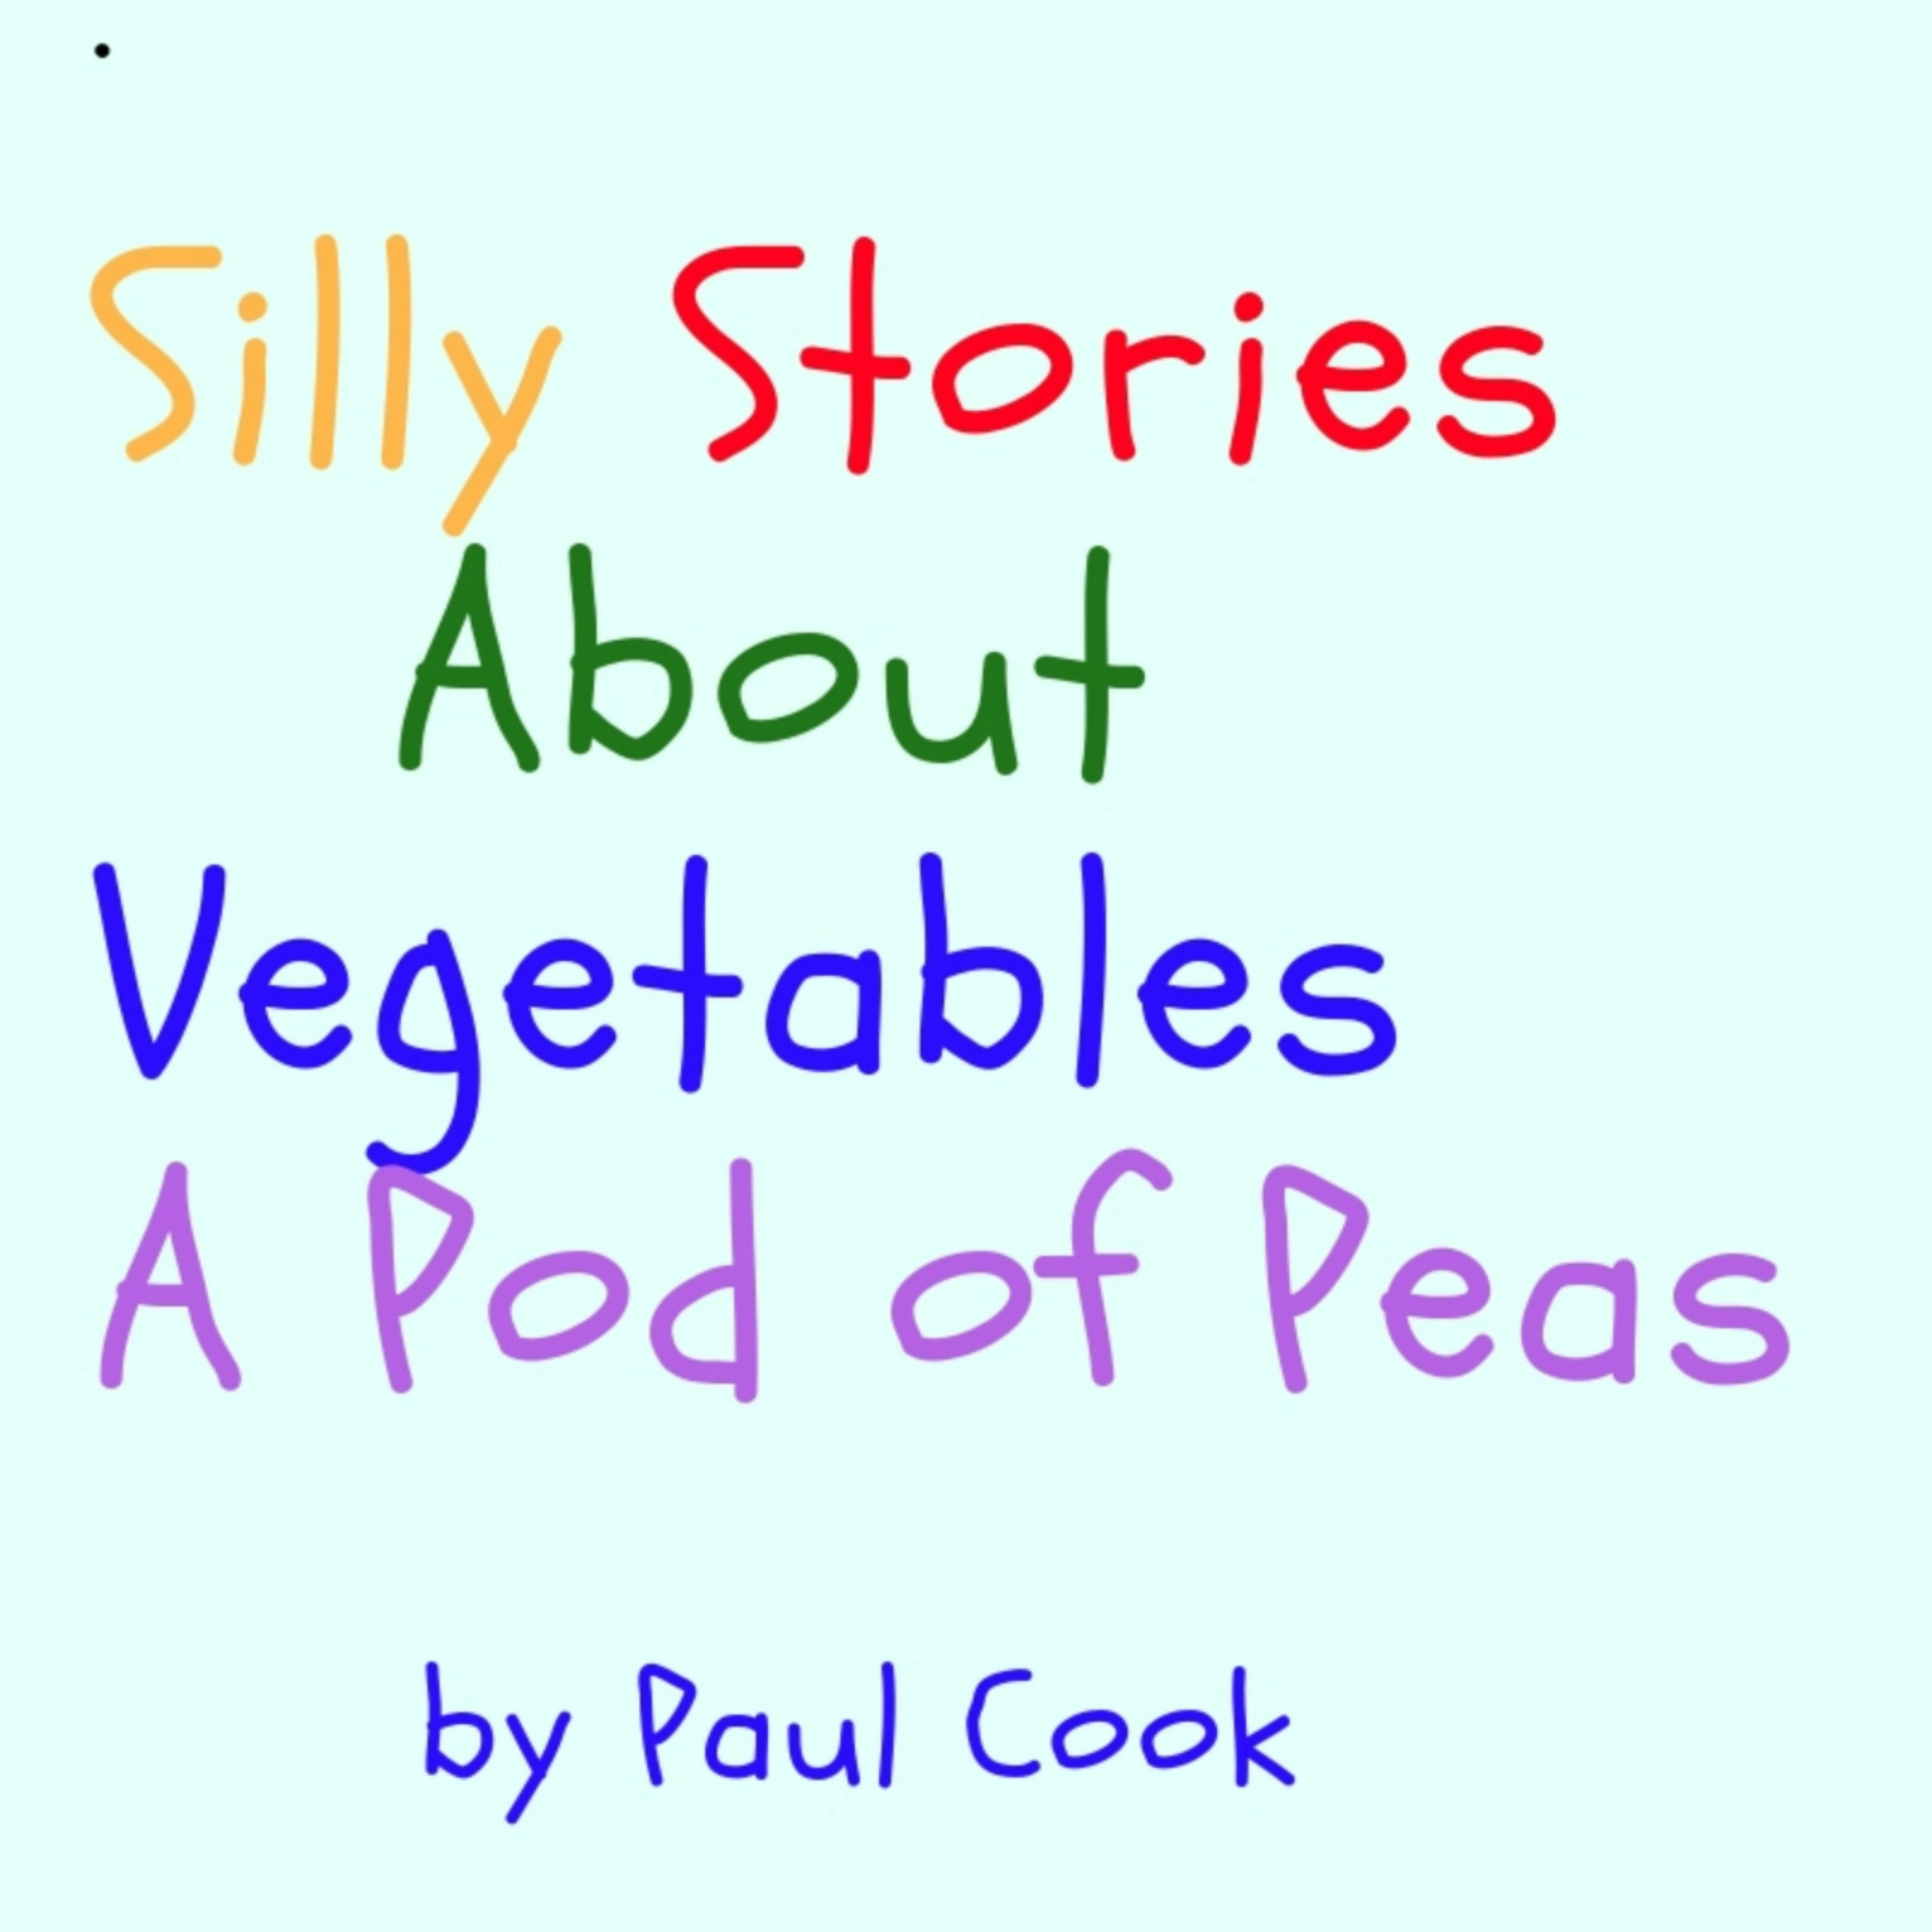 Silly Stories About Vegetables: A Pod of Peas Audiobook by Paul Cook